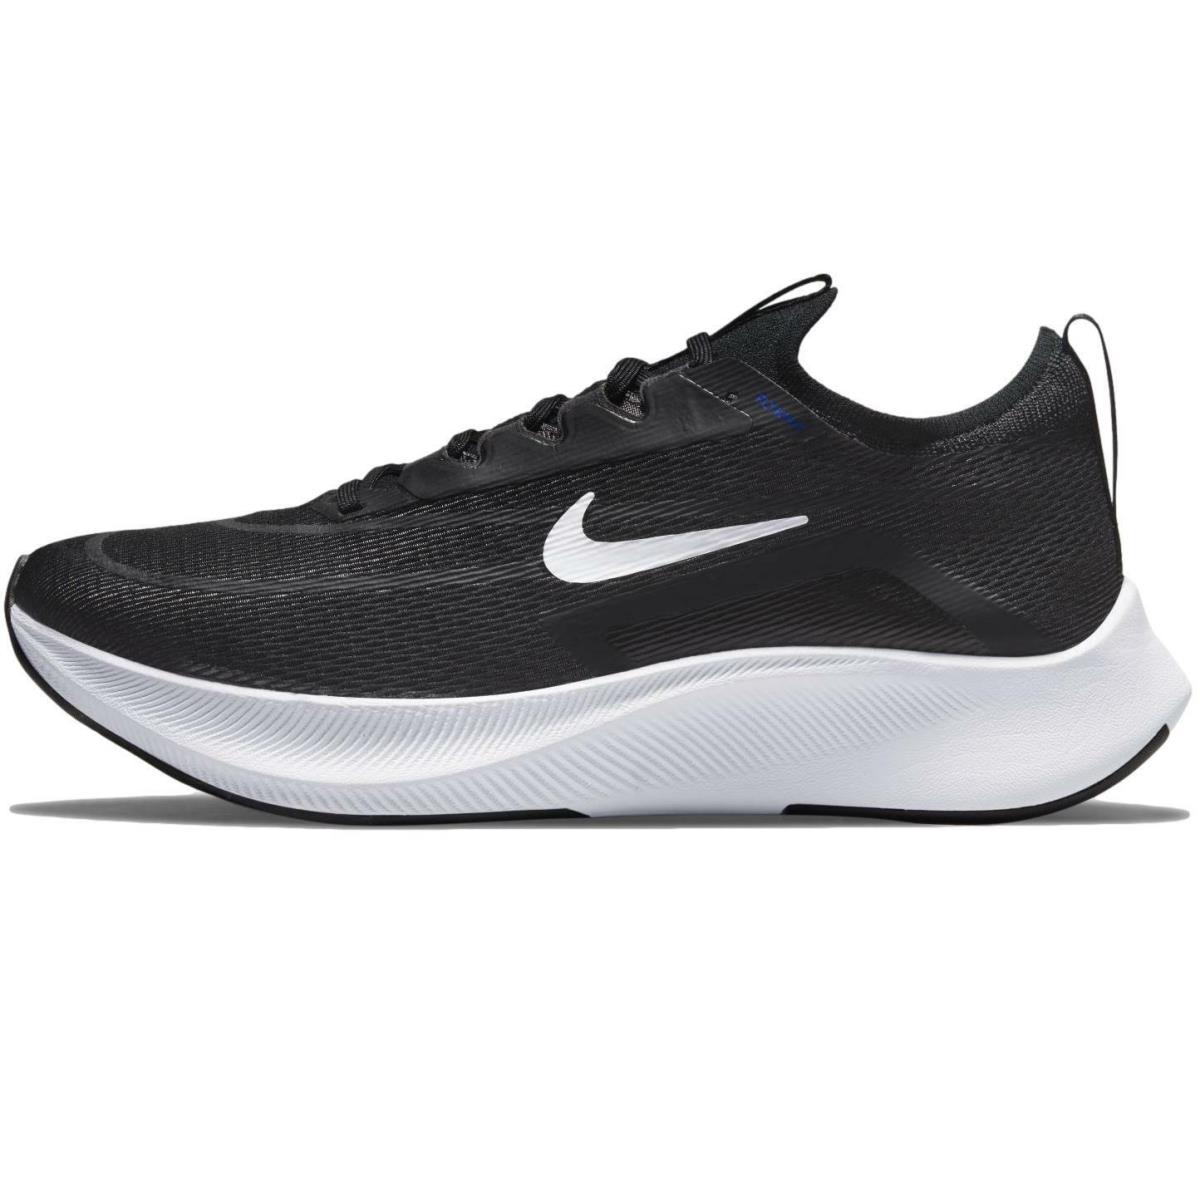 Nike shoes Zoom Fly - Black/White 0